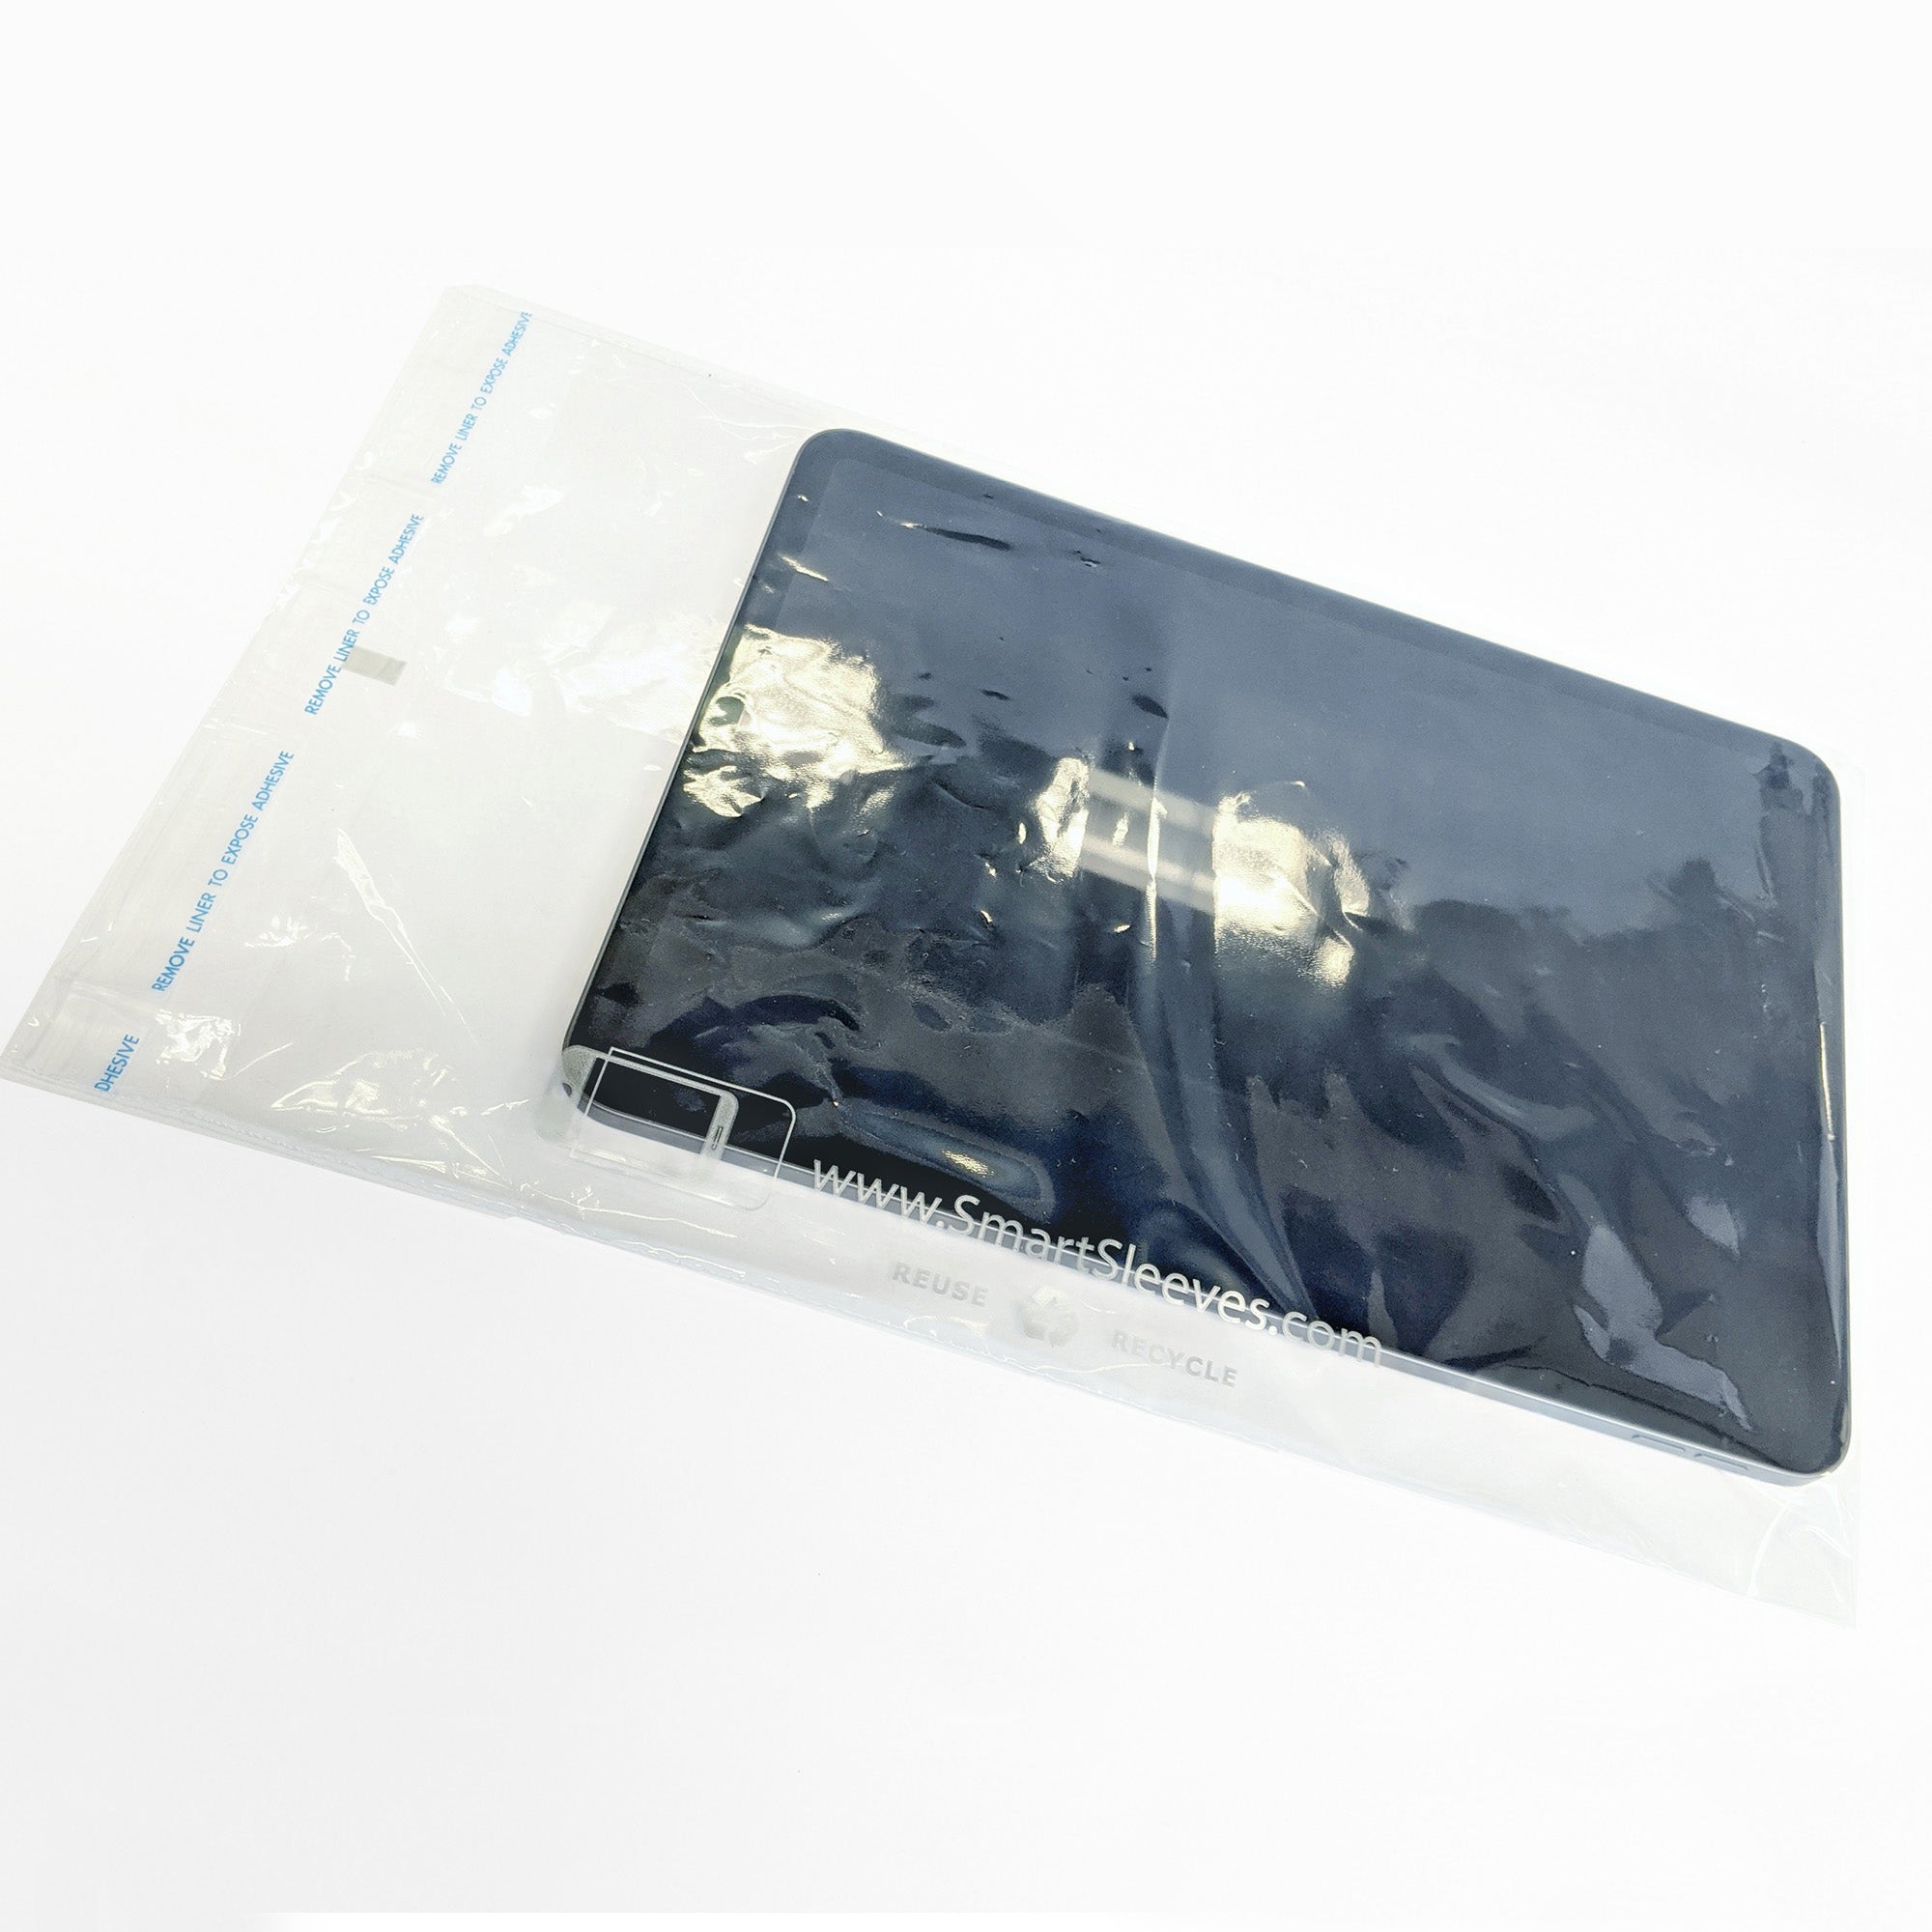 ClearBags Antimicrobial SmartSleeves for Tablets - Small (250pcs) - 15-07386